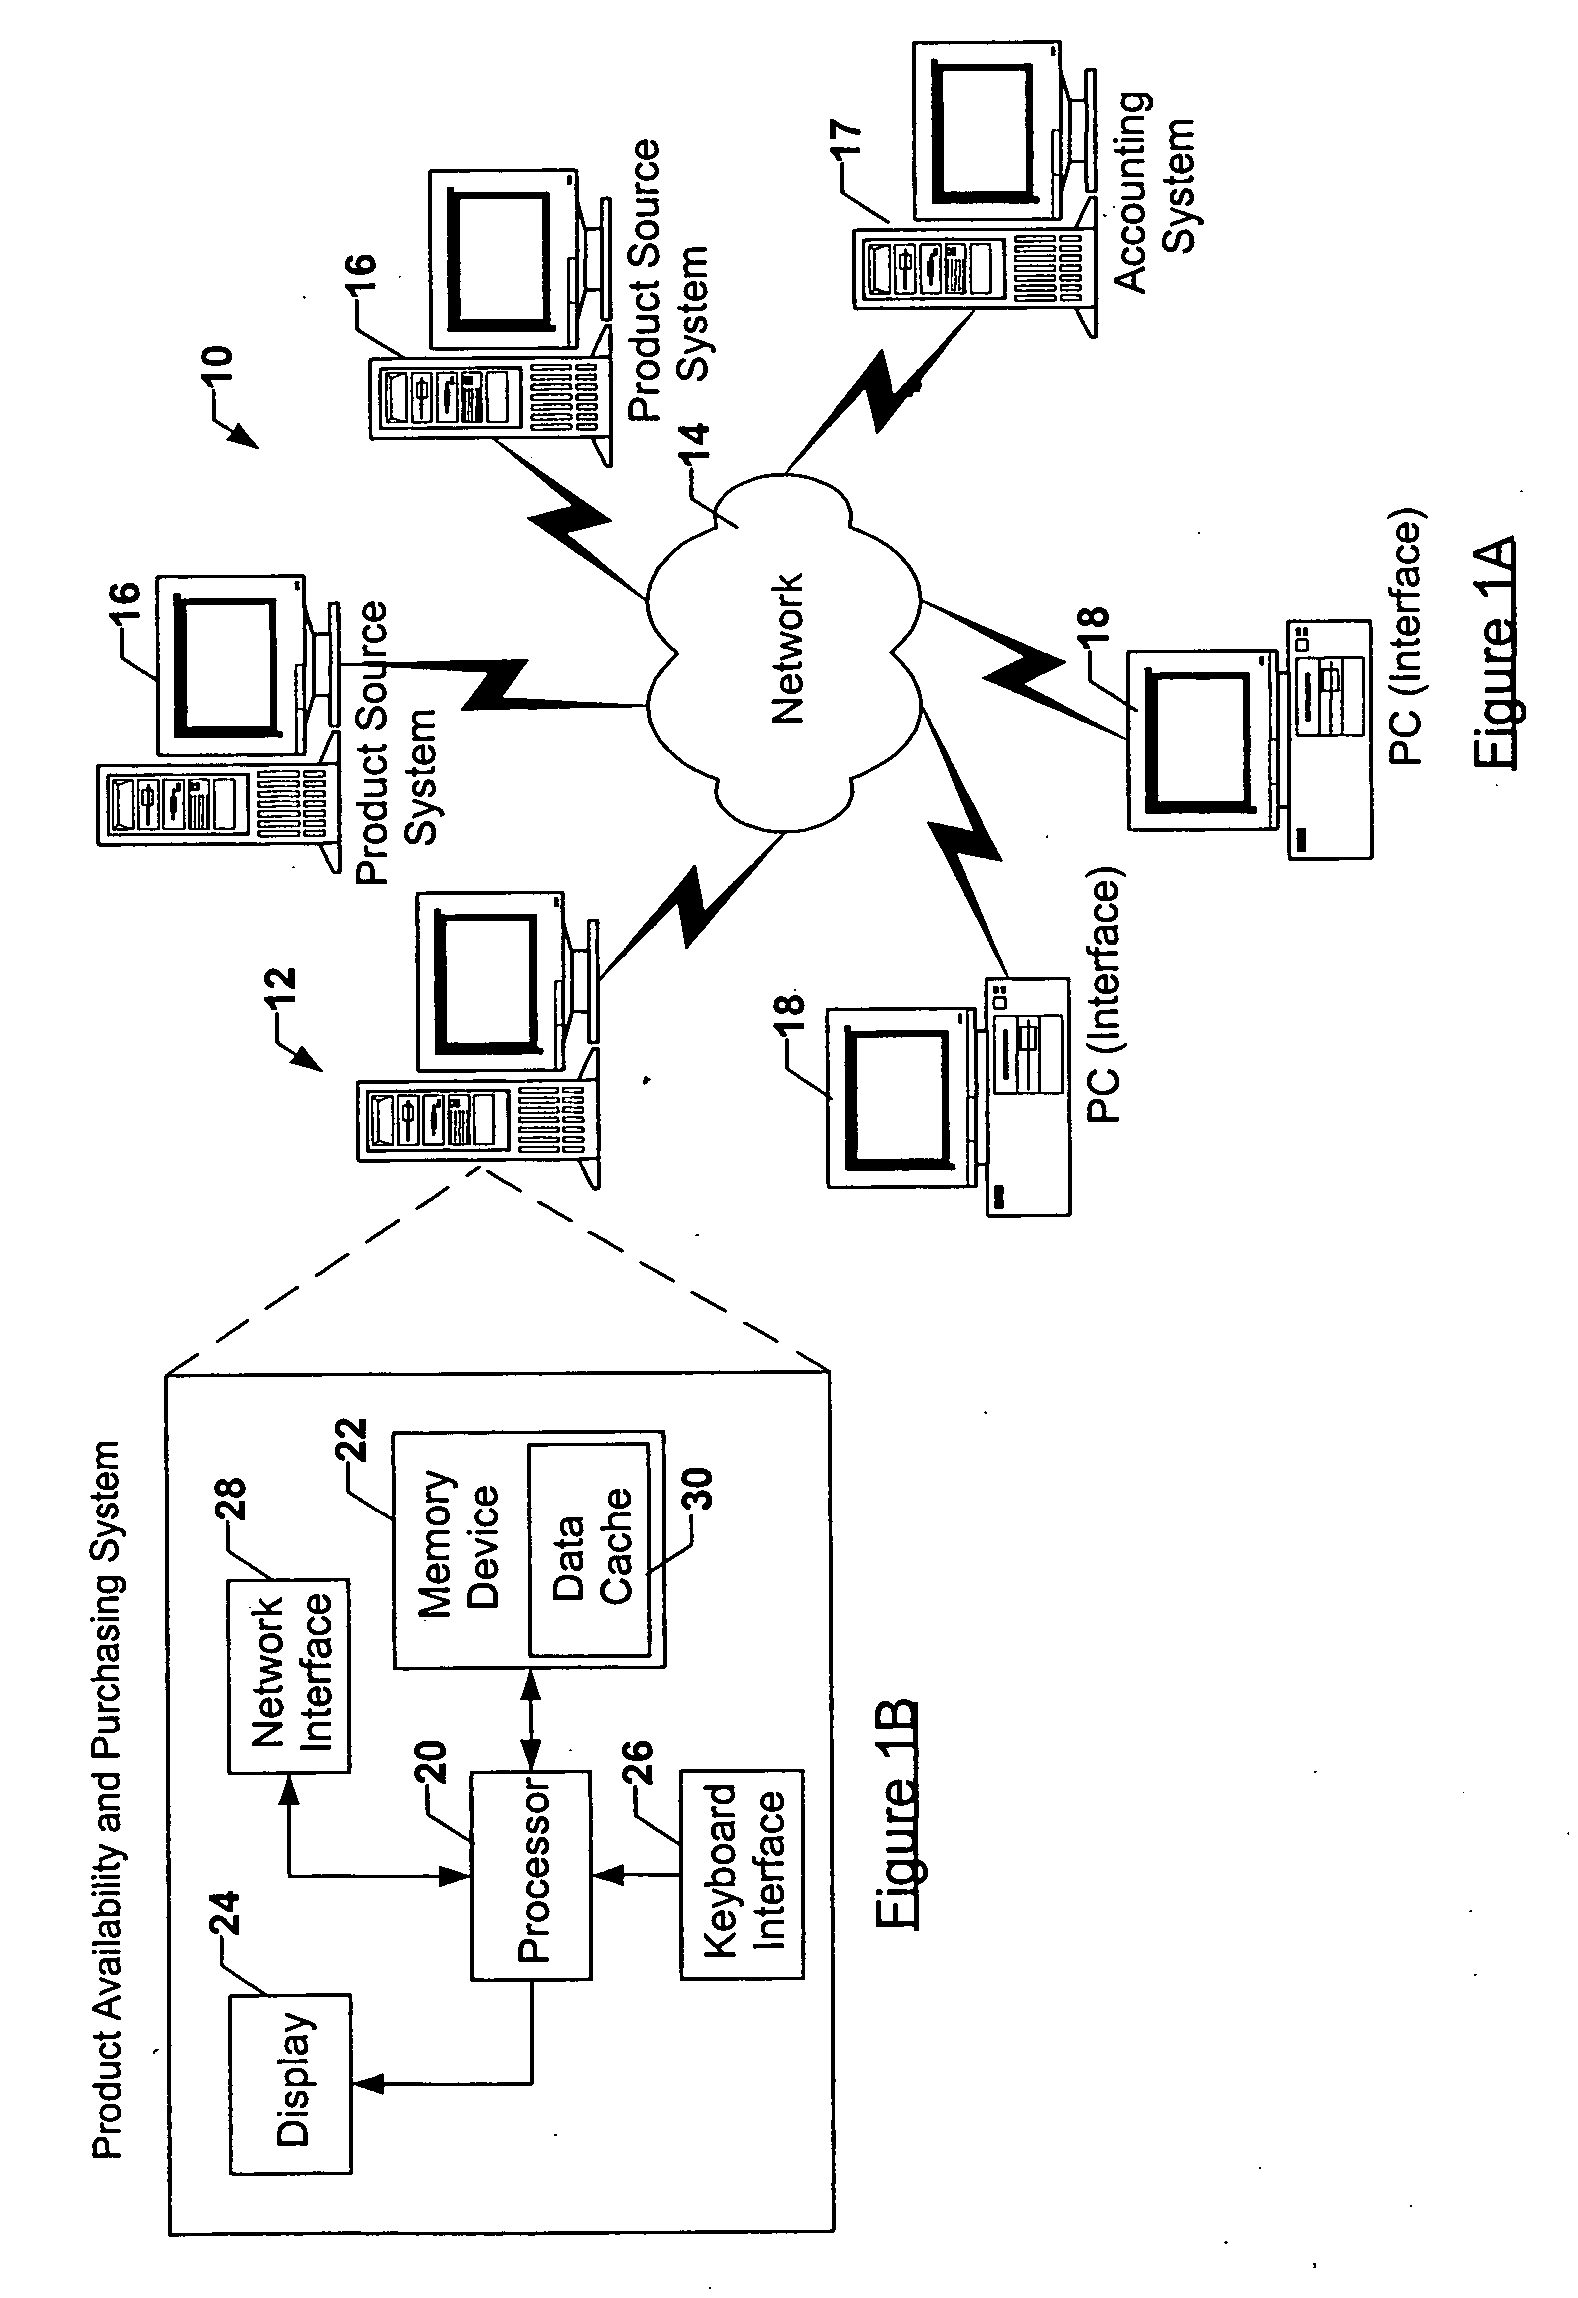 Systems, methods, and computer program products for relieving usage overloads in computer inventory systems by detecting and relaying pricing changes to a user